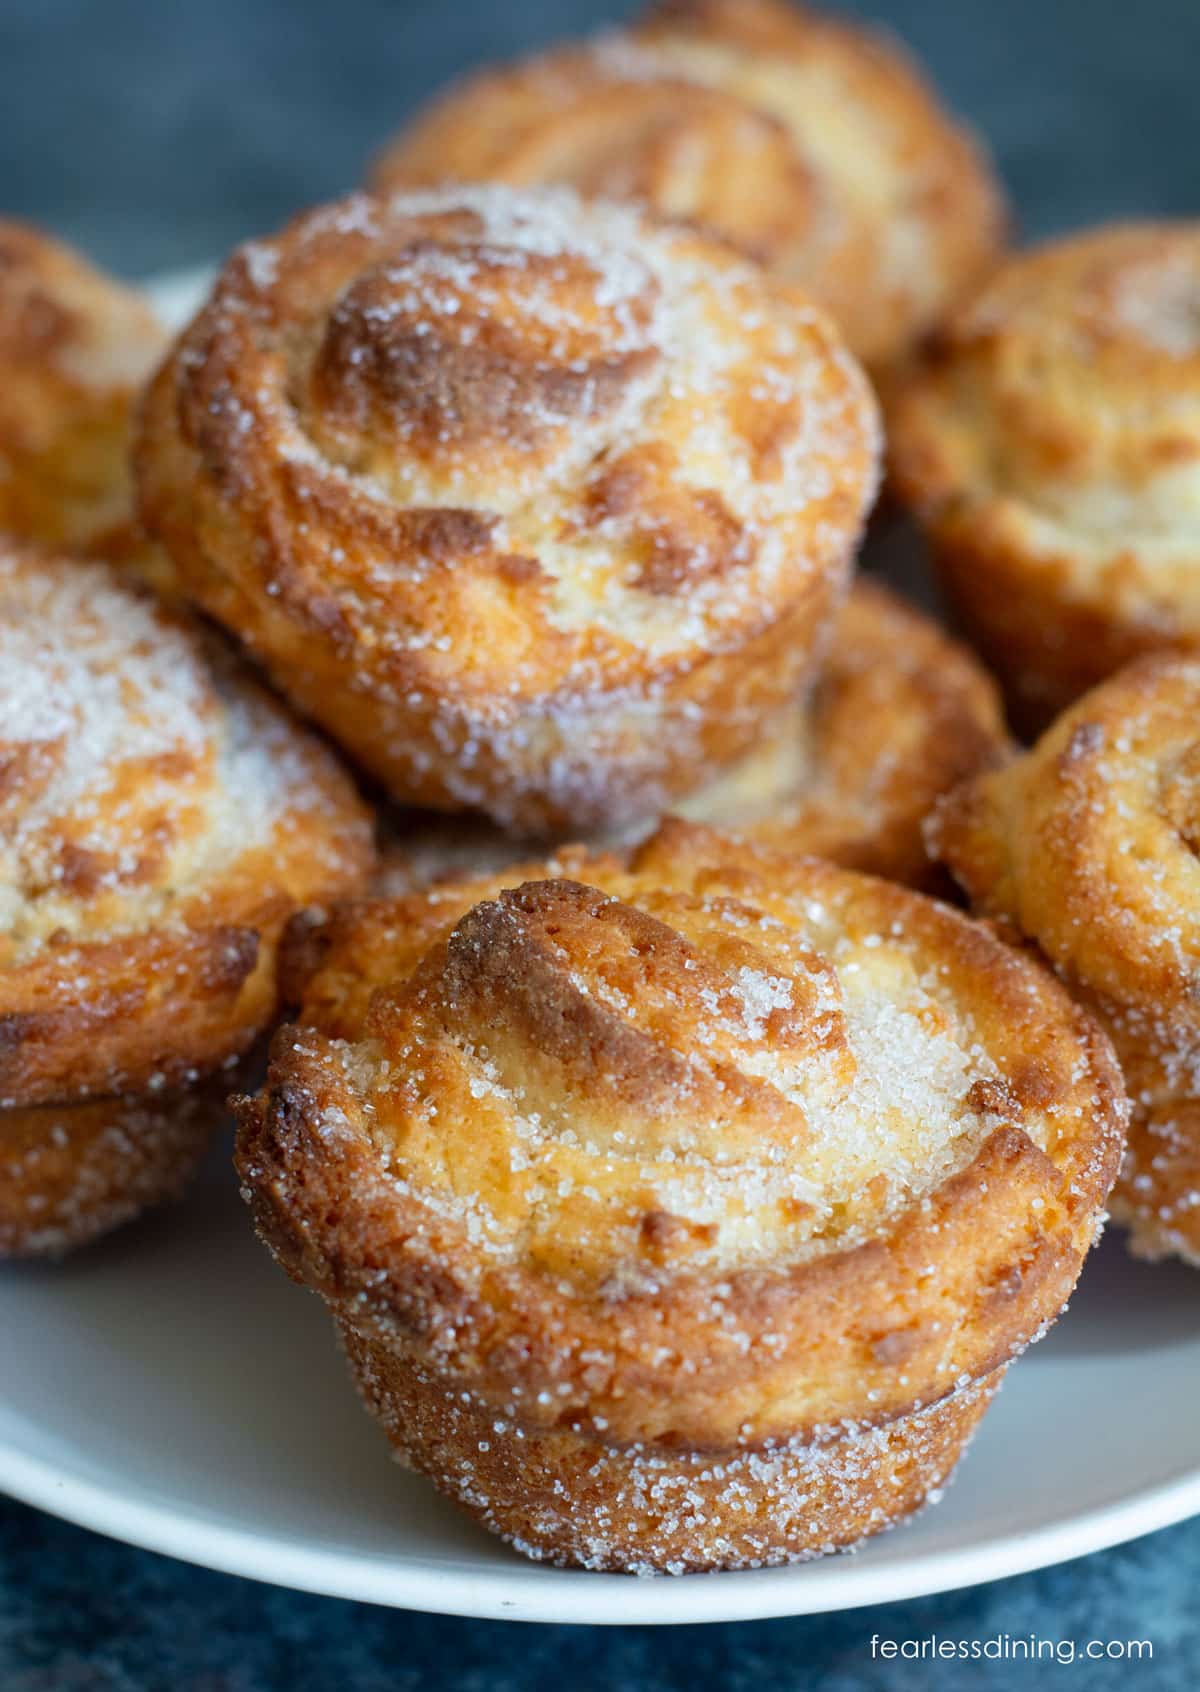 A batch of gluten free cruffins on a white plate.